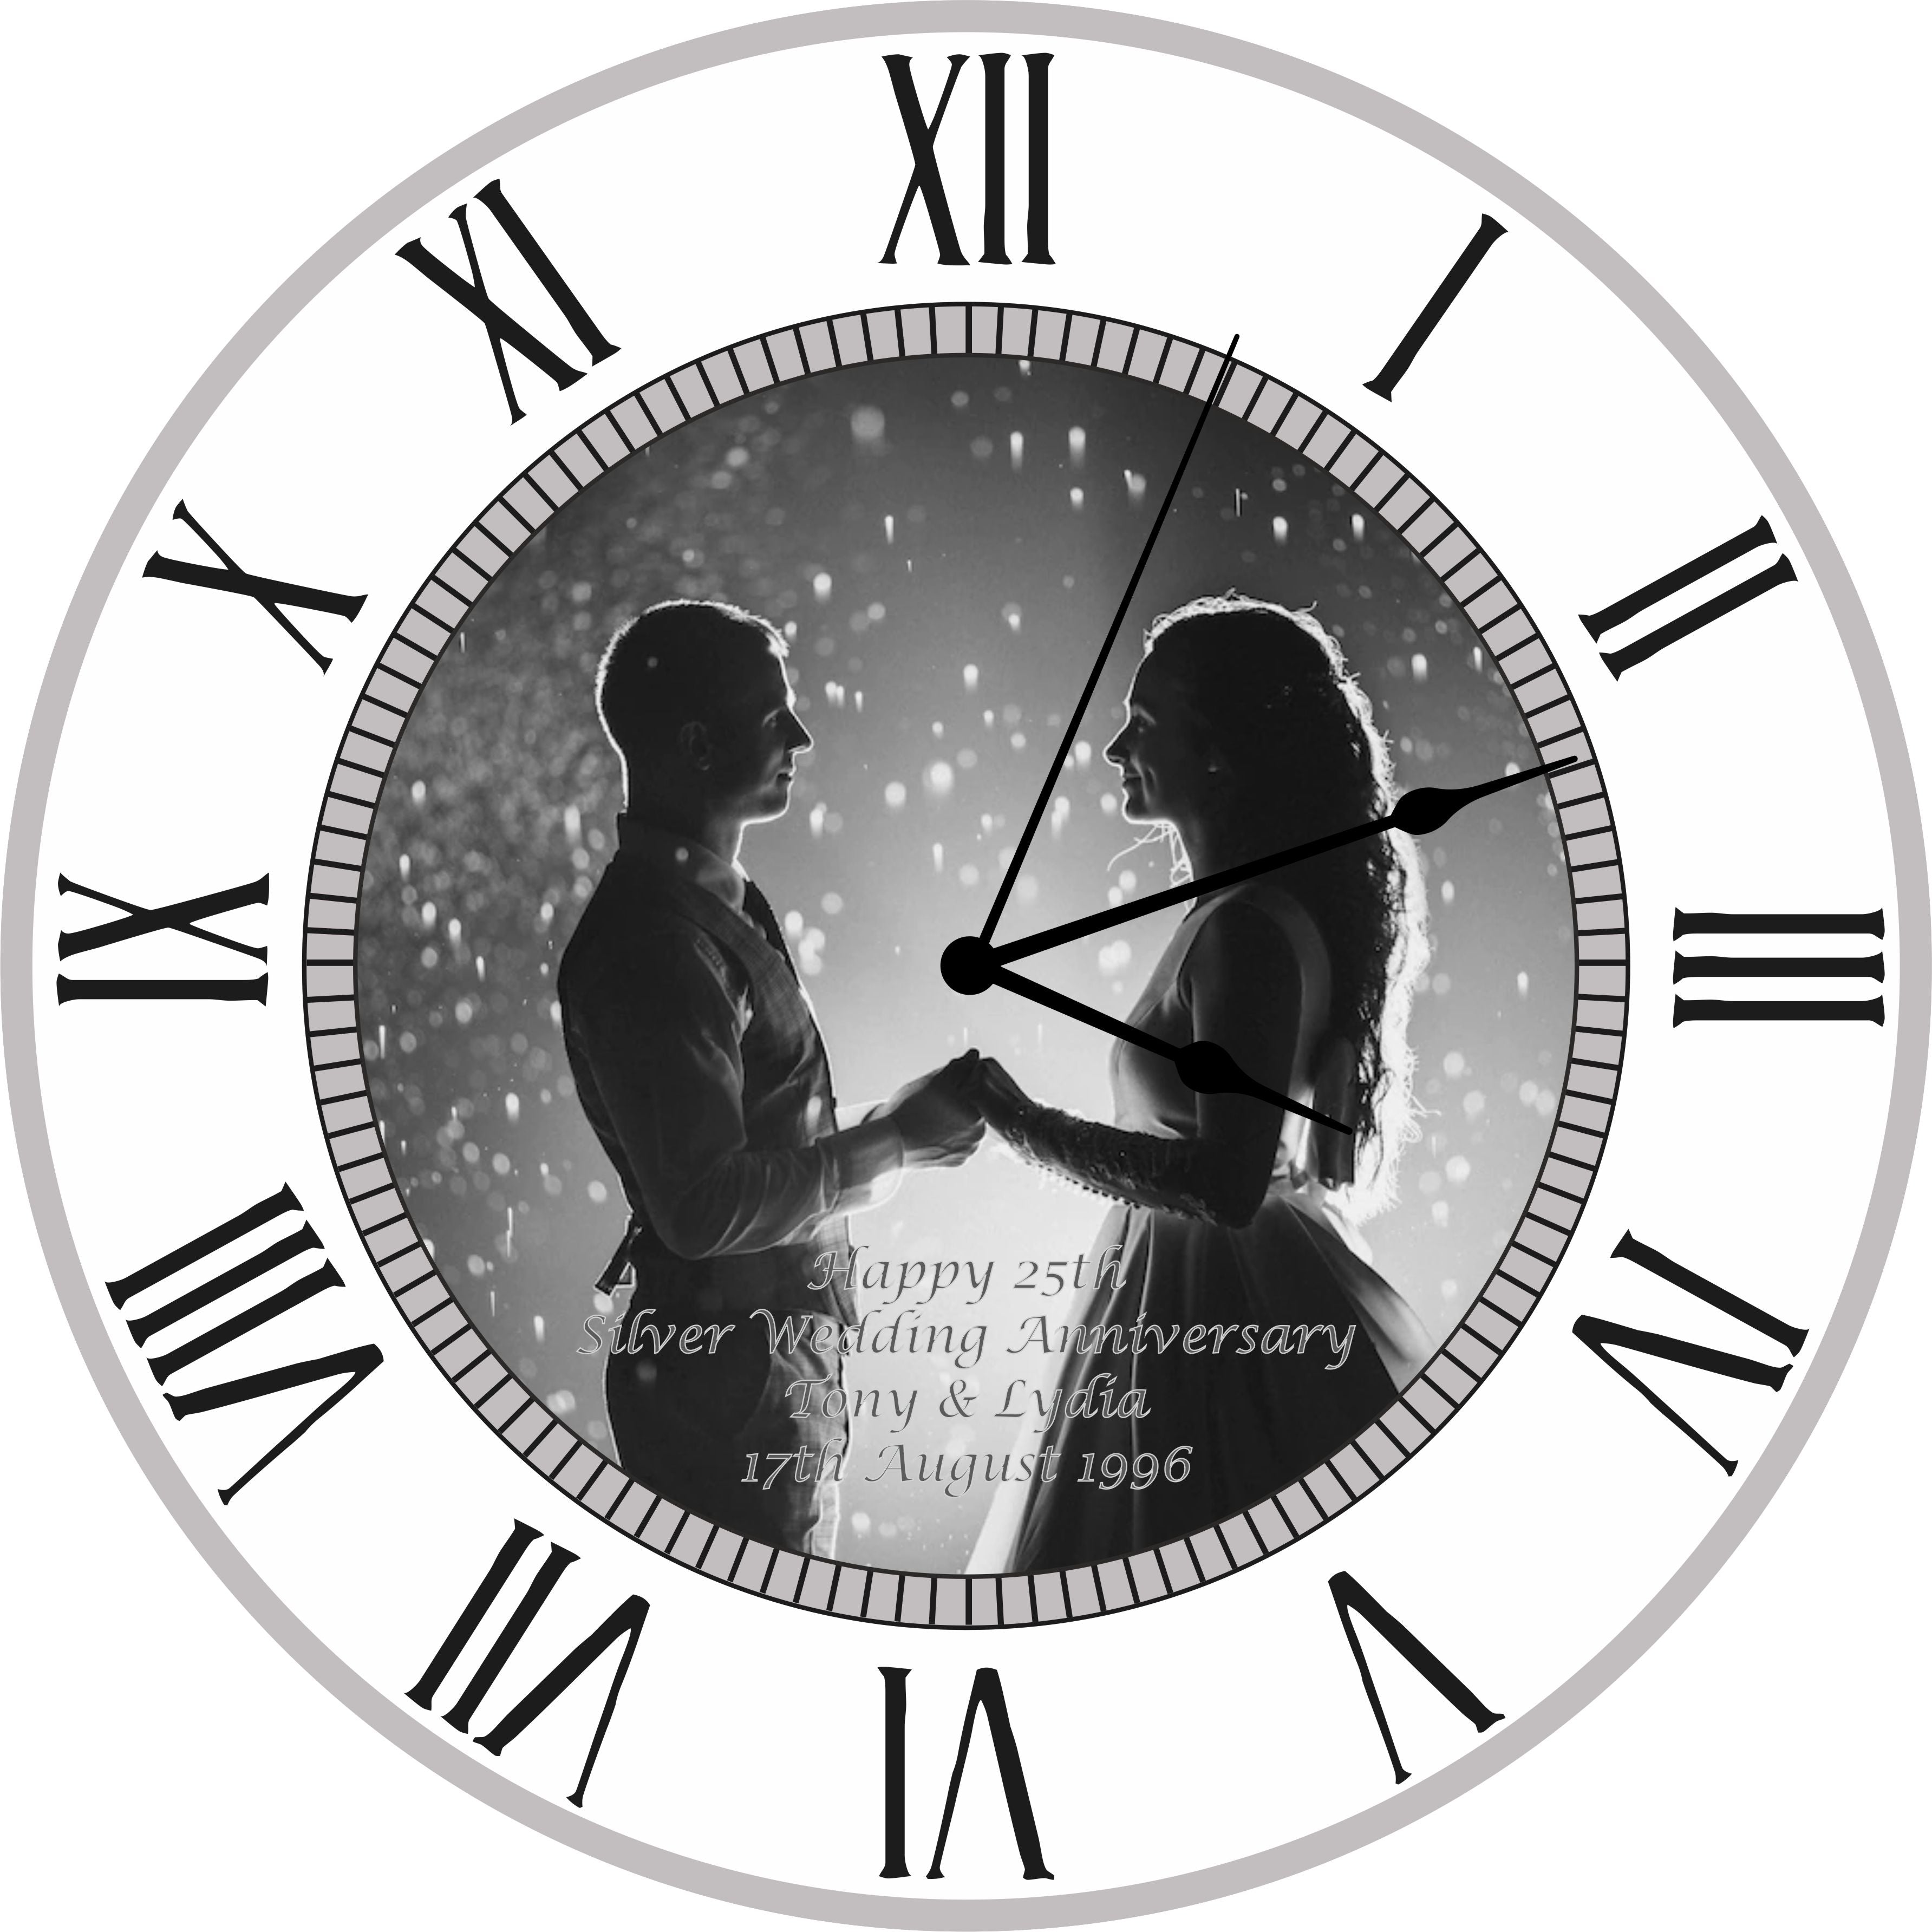 25th Silver Wedding Anniversary Personalised Photo Clock - Bespoke Personalised Anniversary Gift (30cm Silent Clock)